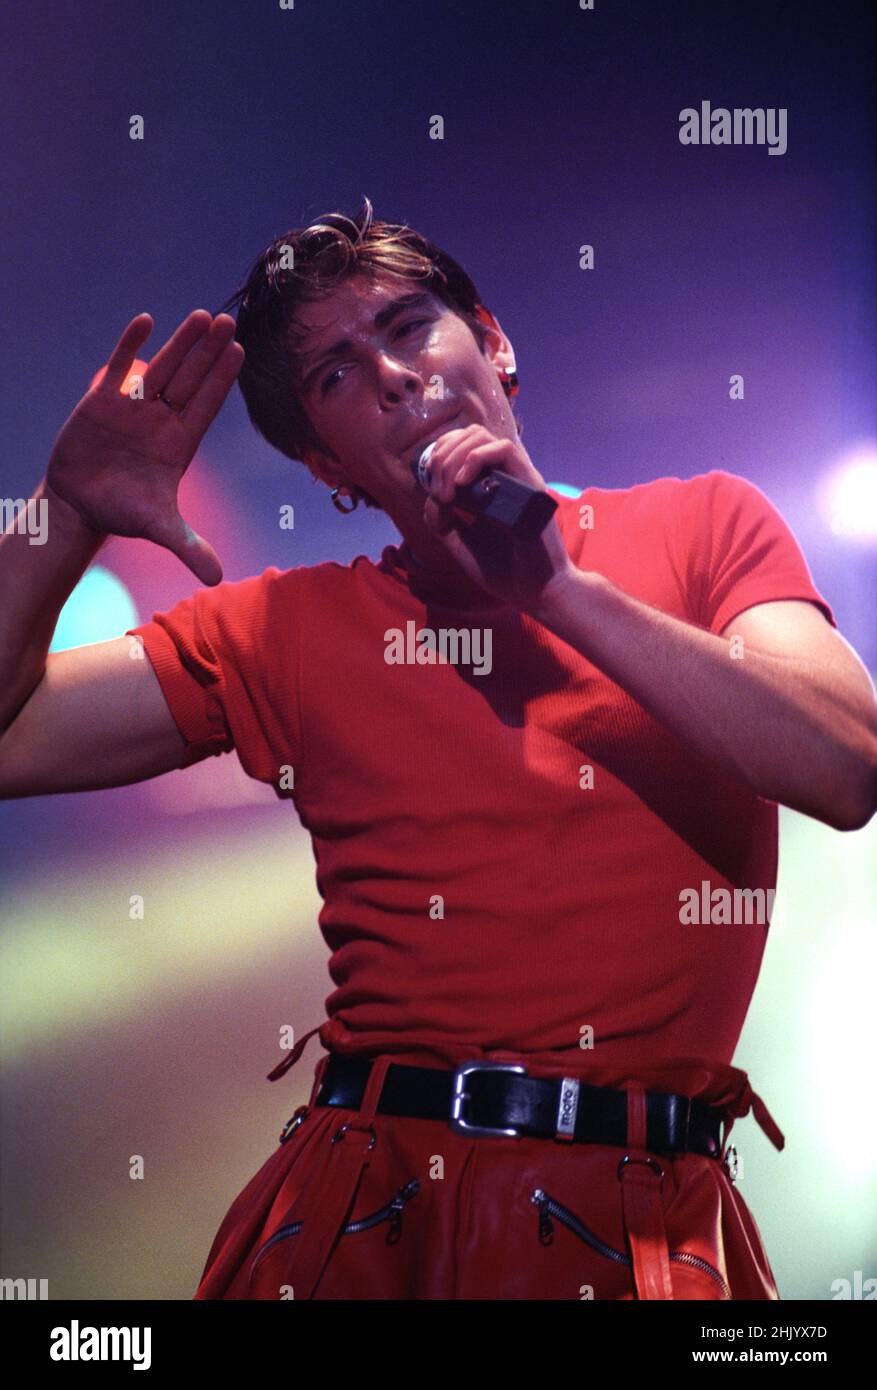 Boyzone, Shane Lynch on stage at The V96 Concert held in Chelmsford, UK. 26th August 1996 Stock Photo